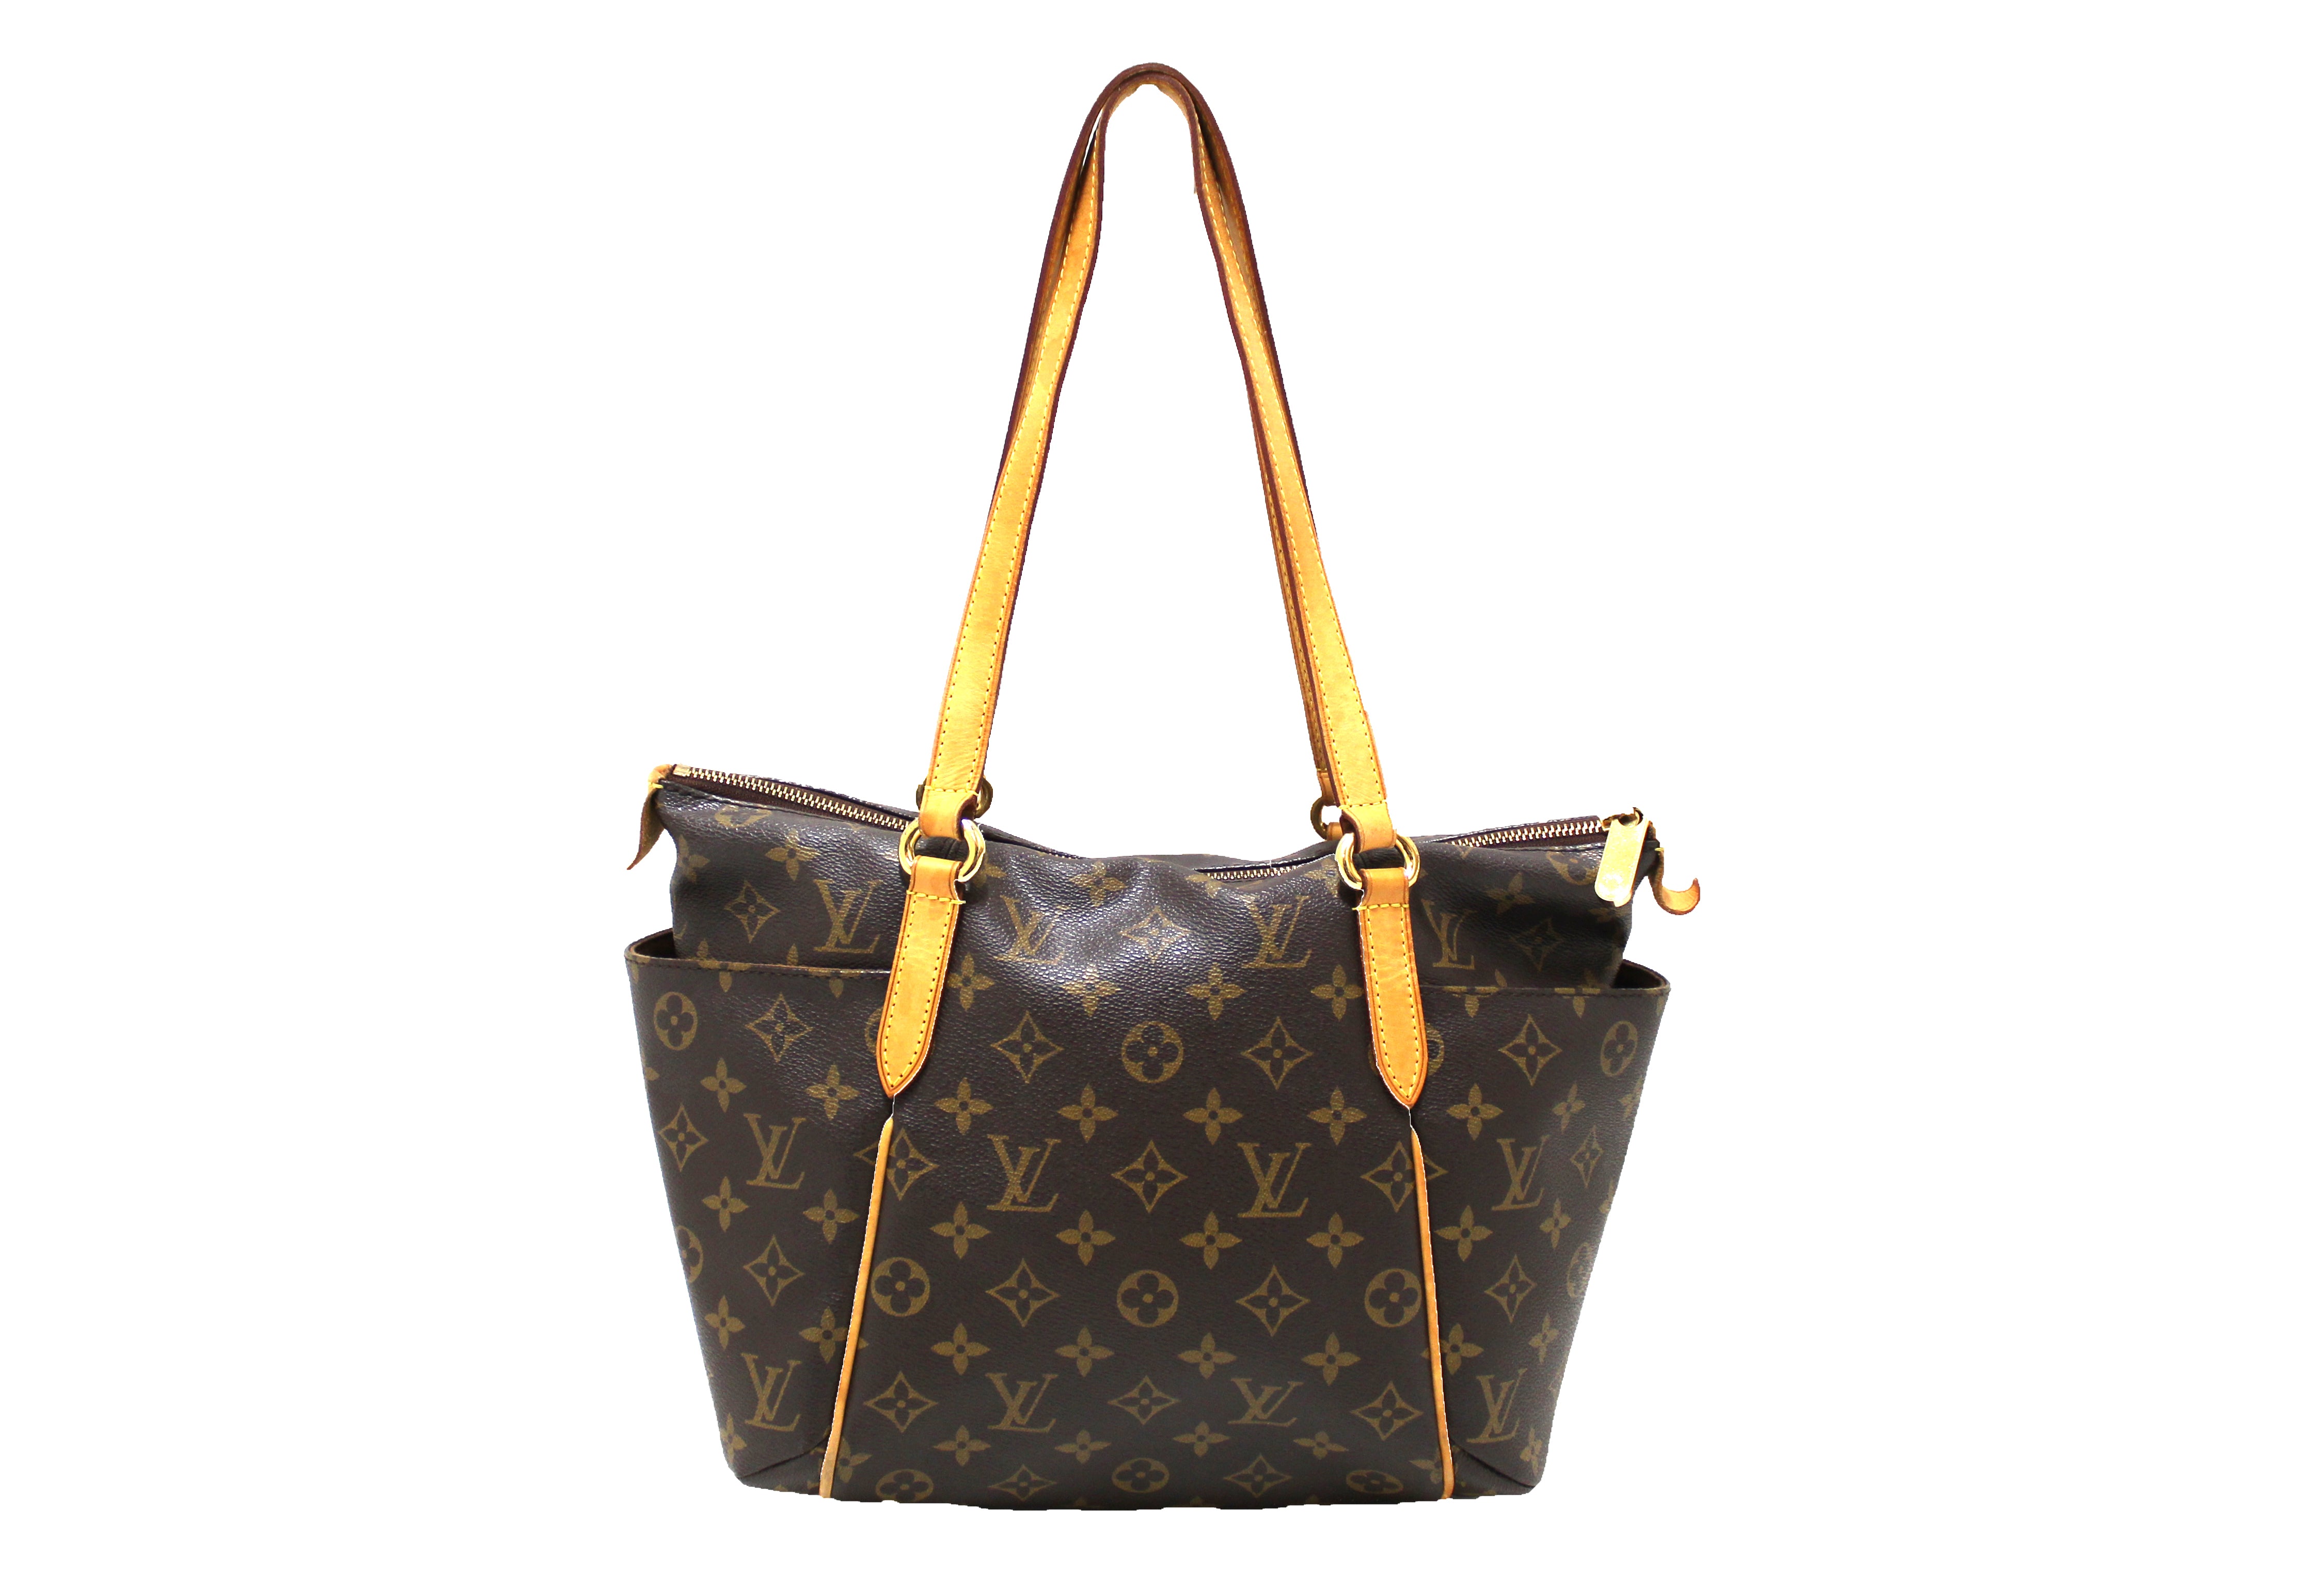 Vintage Louis Vuitton Monogram Totally GM Large Tote Bag Leather